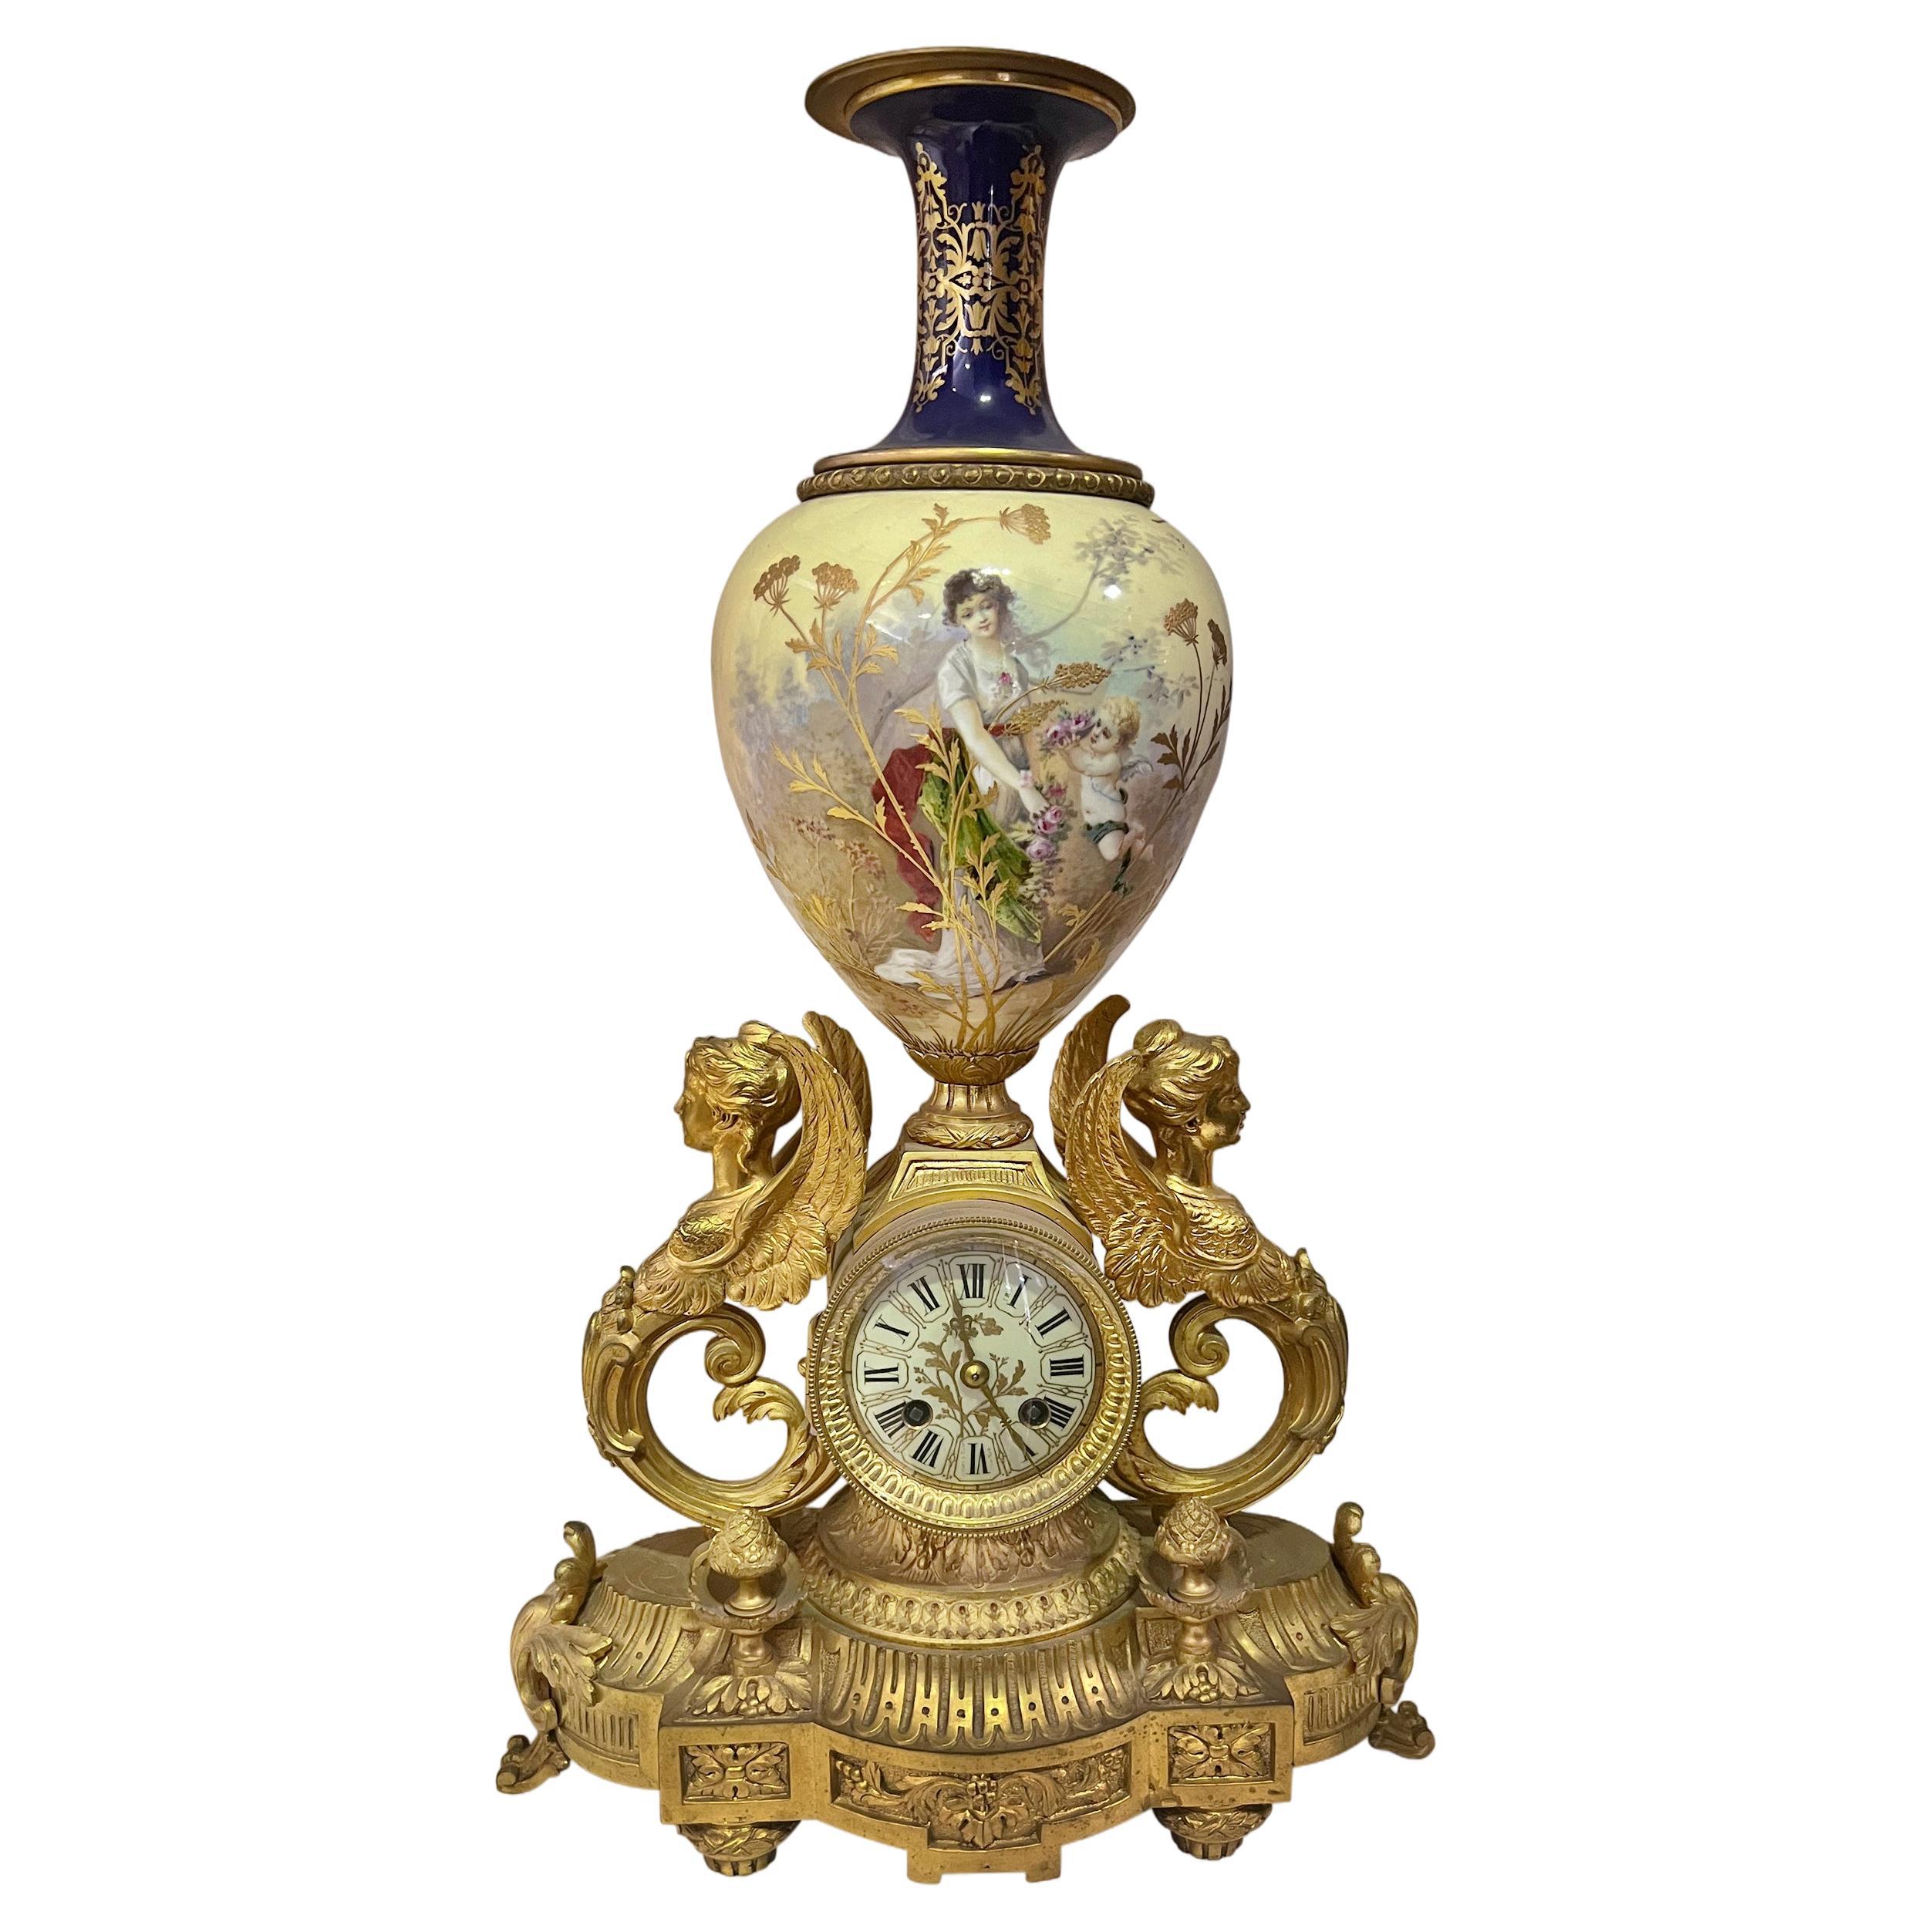 A 19th Century Gilt Bronze & Porcelain Mantel Clock Retailed by Tiffany & Co.